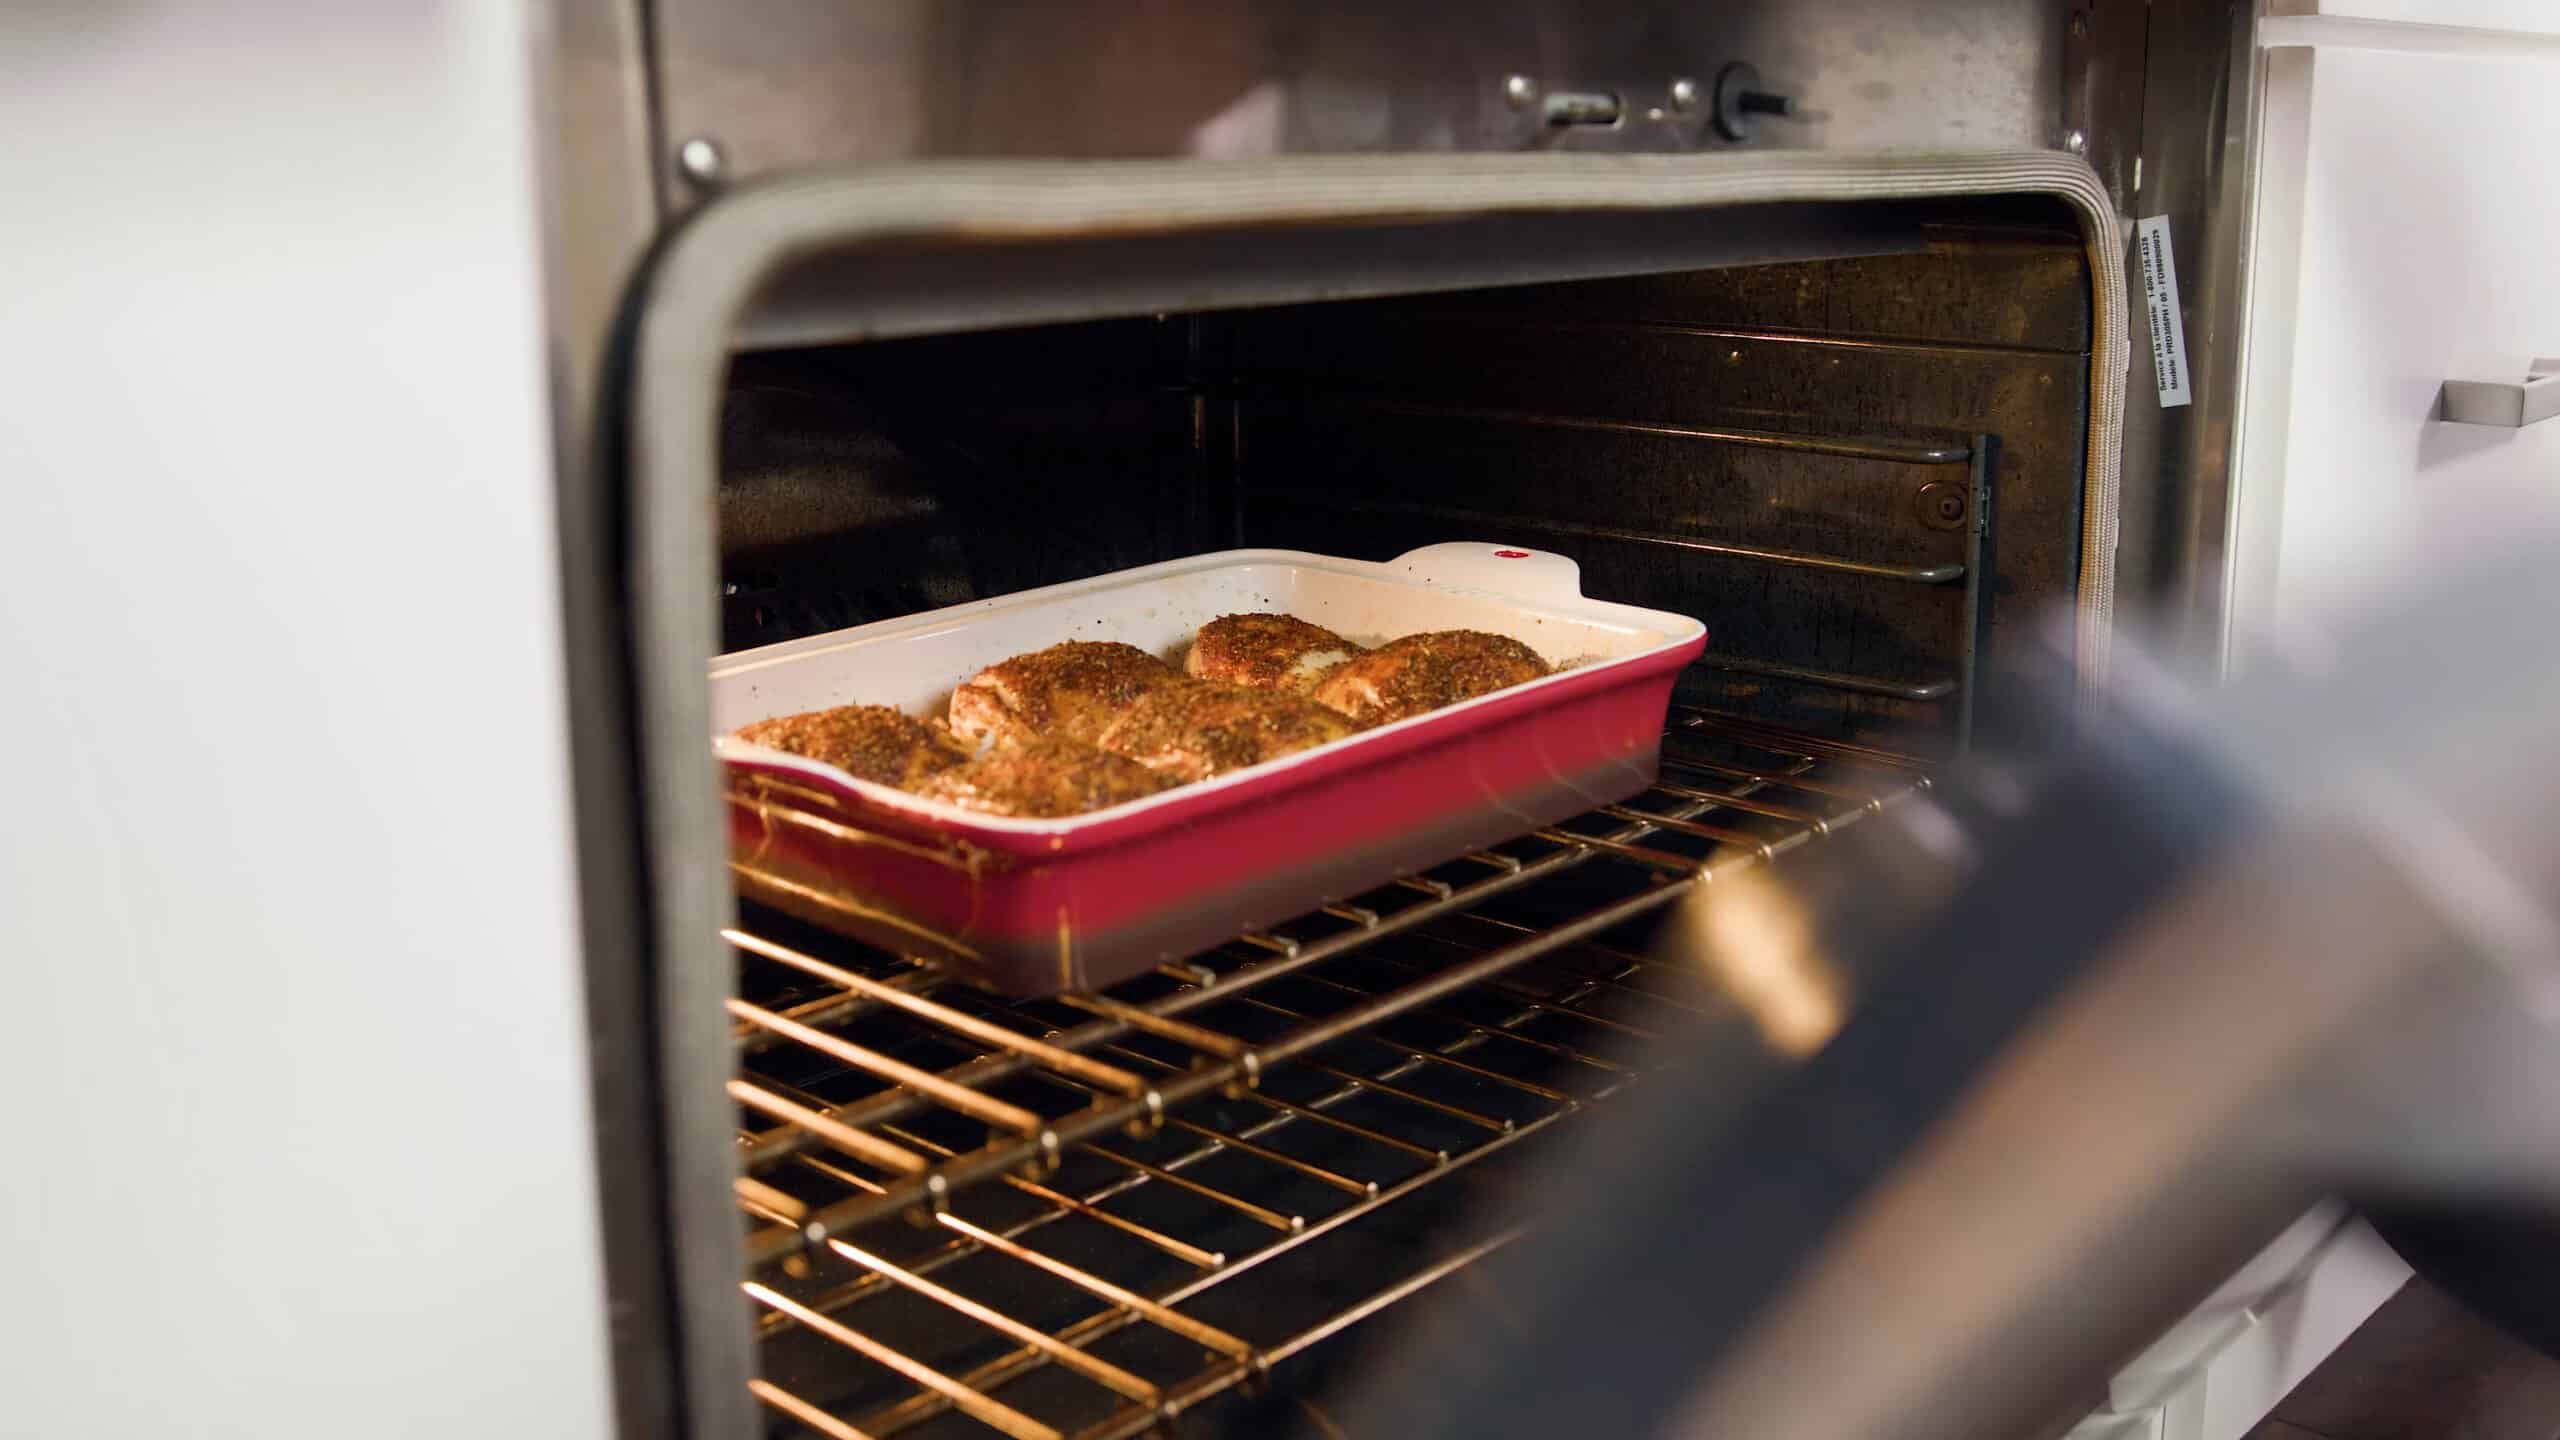 Angled view of open oven with an enamel coated cast iron casserole dish filled with chicken thighs placed on a metal rack in the middle of the oven for a second time.